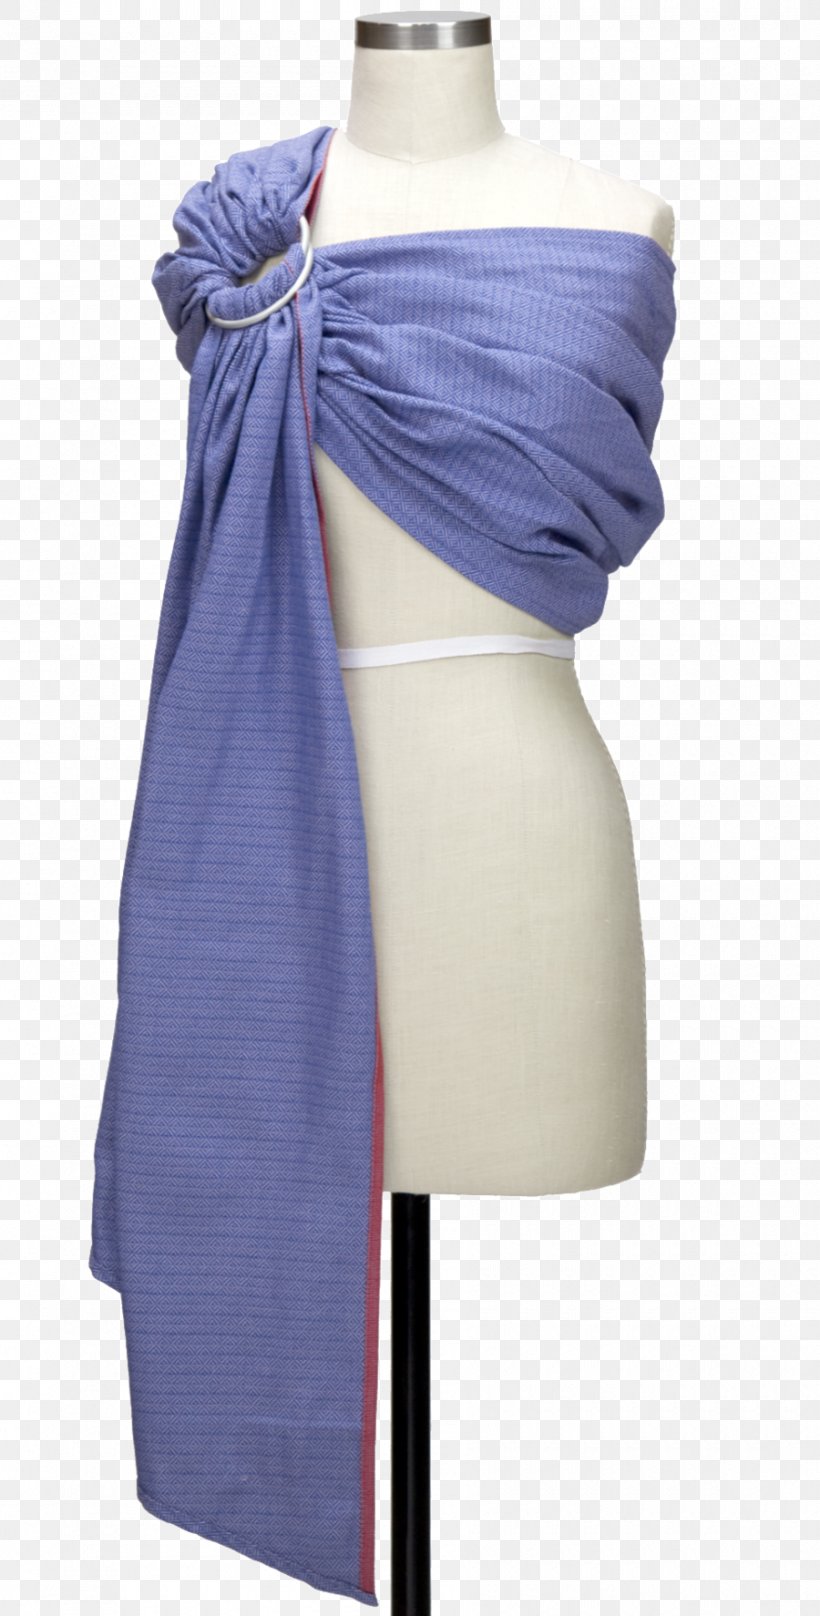 Baby Sling Clothing Accessories Babywearing Scarf, PNG, 900x1774px, Baby Sling, Babywearing, Clothing, Clothing Accessories, Cobalt Blue Download Free